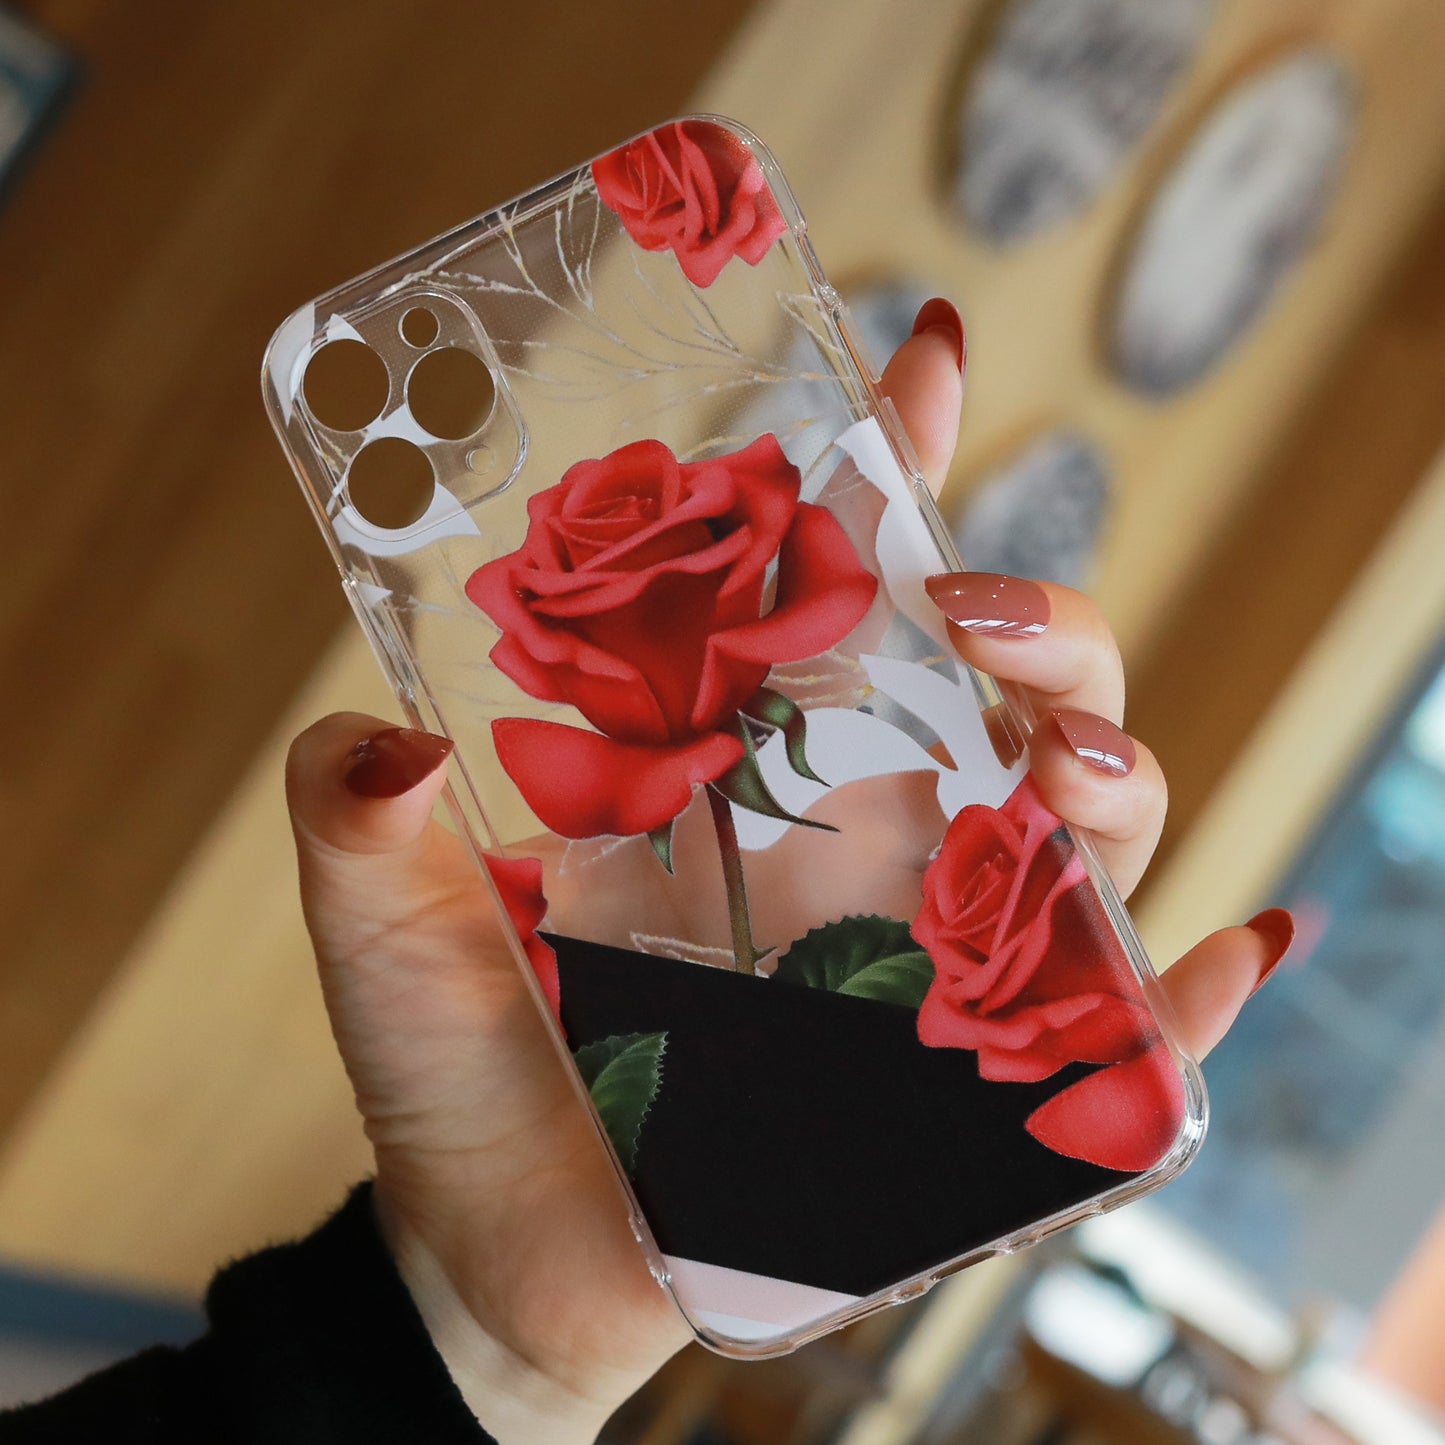 Rose Floral Print Clear Phone Case Phone Cover